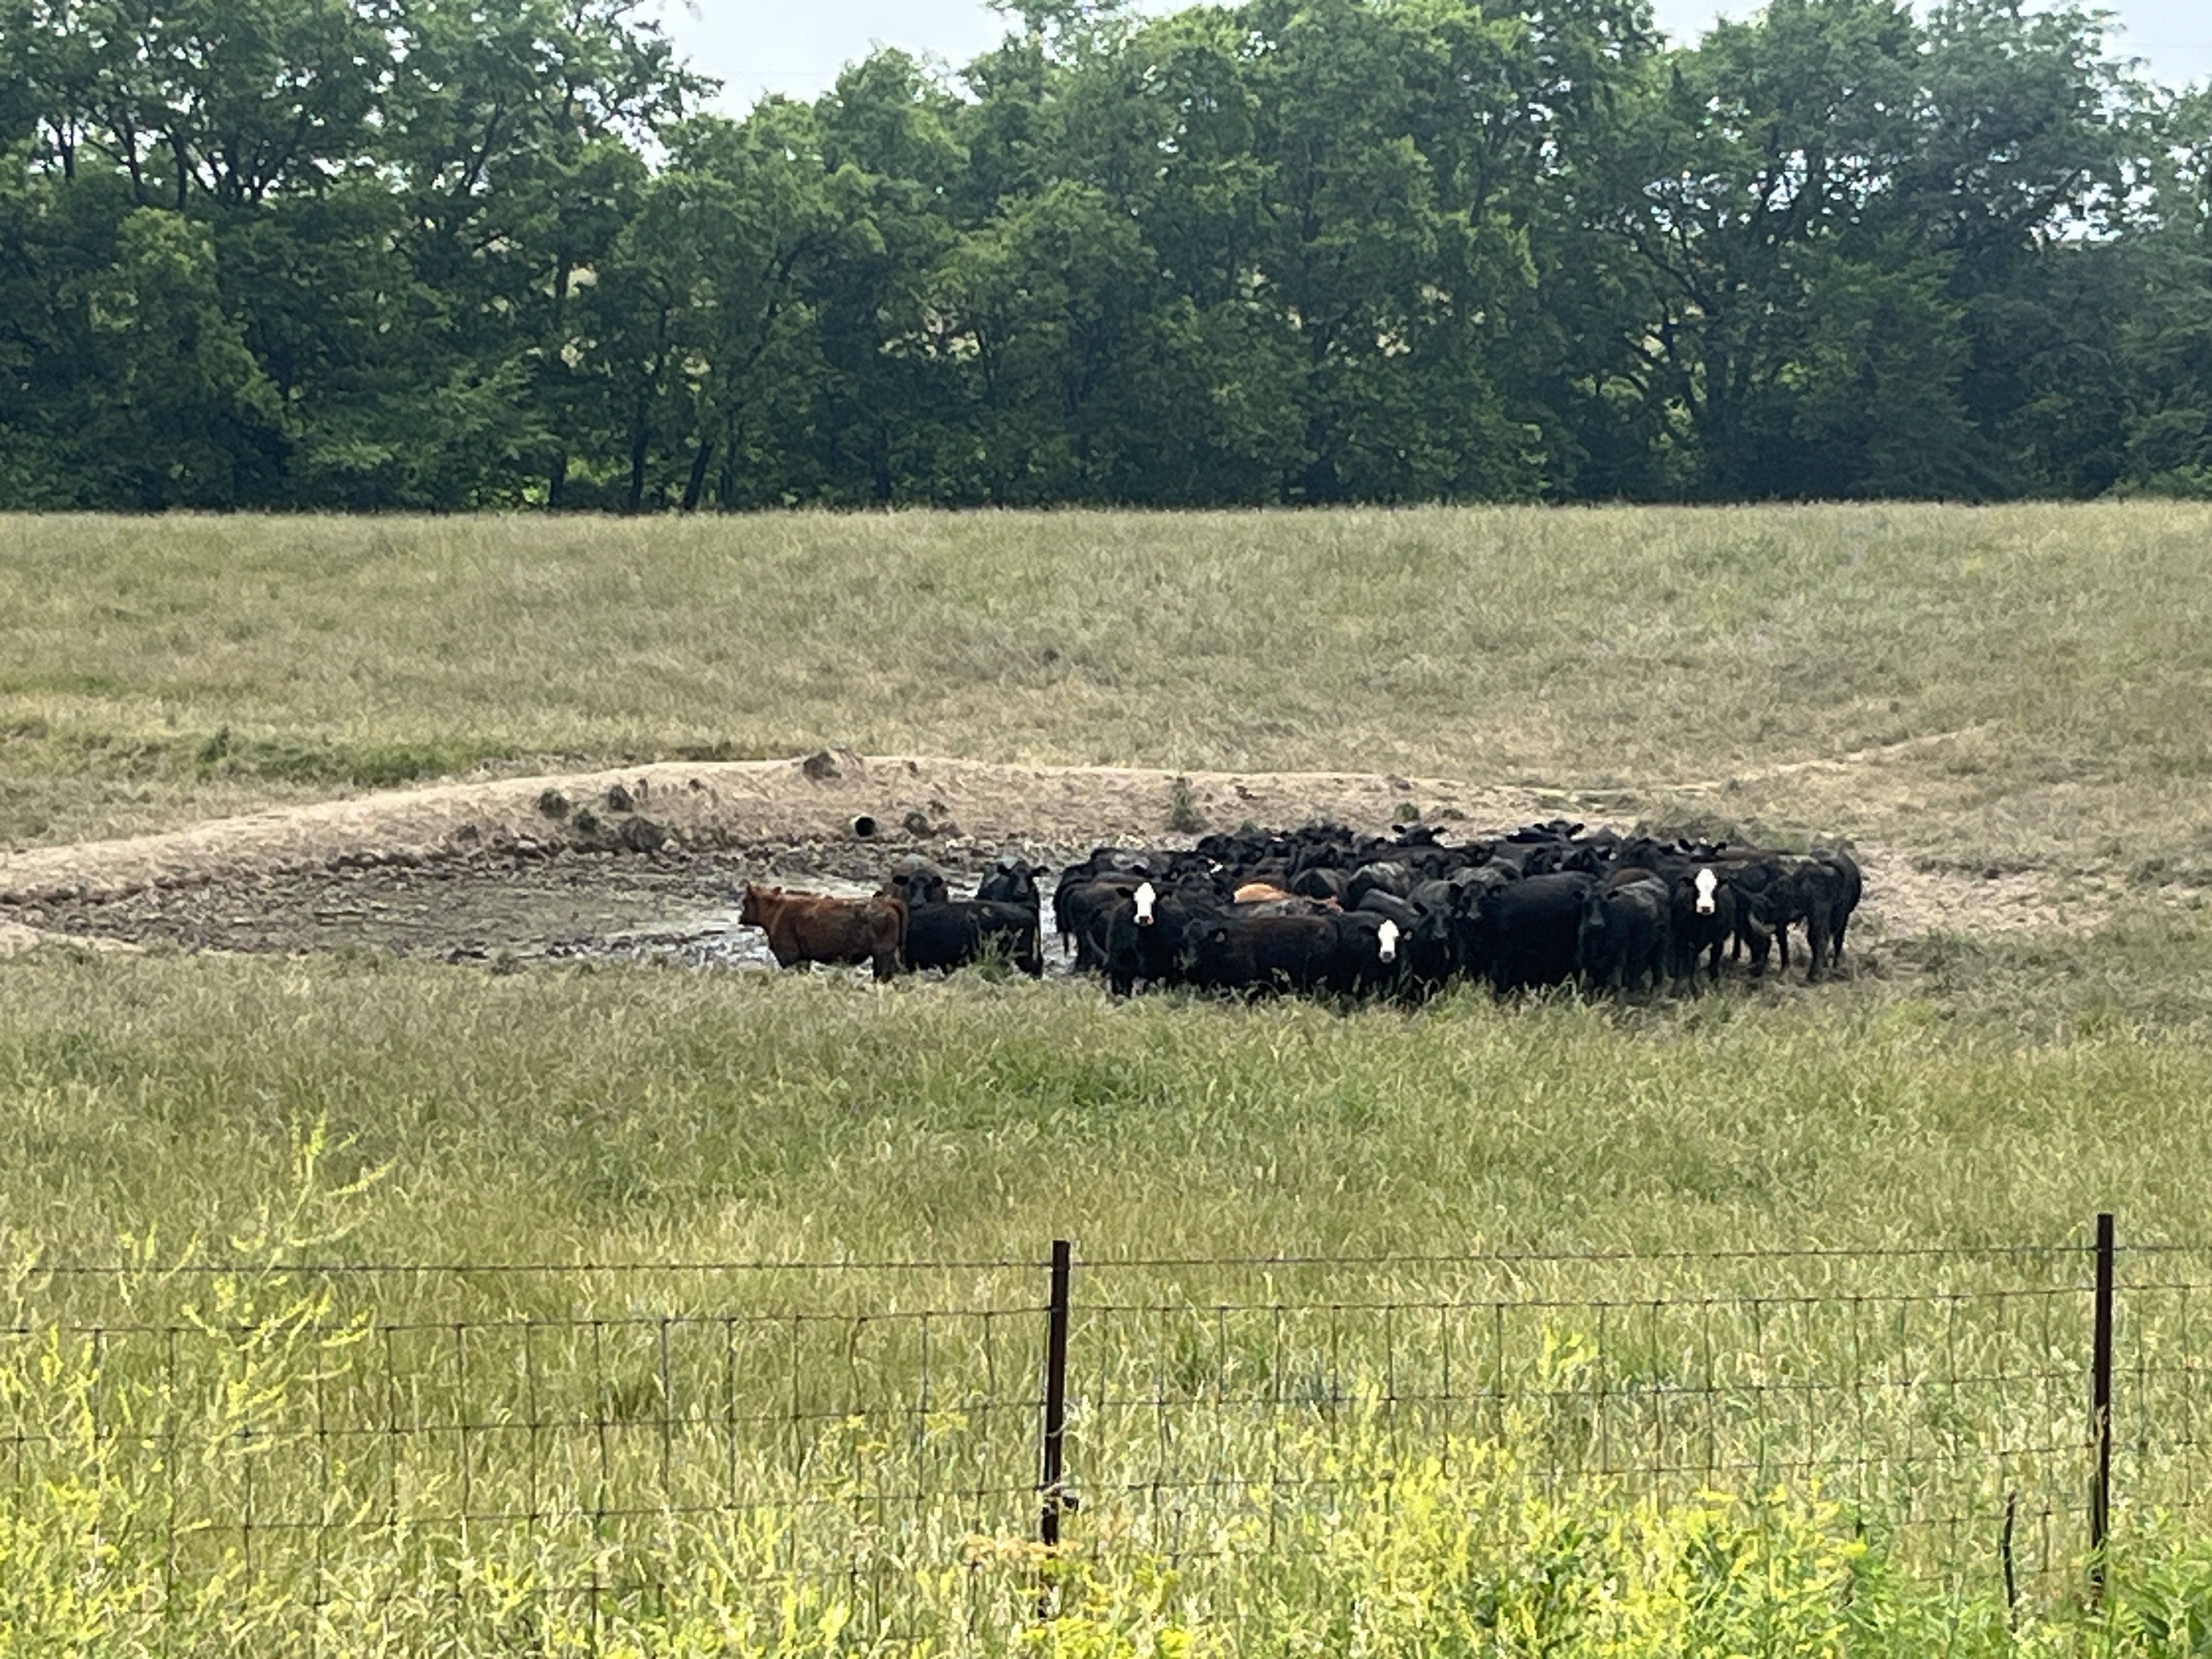 Missouri livestock producers face dwindling water supplies for their herds. University of Missouri Extension specialists urge producers to contact their county USDA office to find resources to plan for future water shortages. Marion County photo by Charle